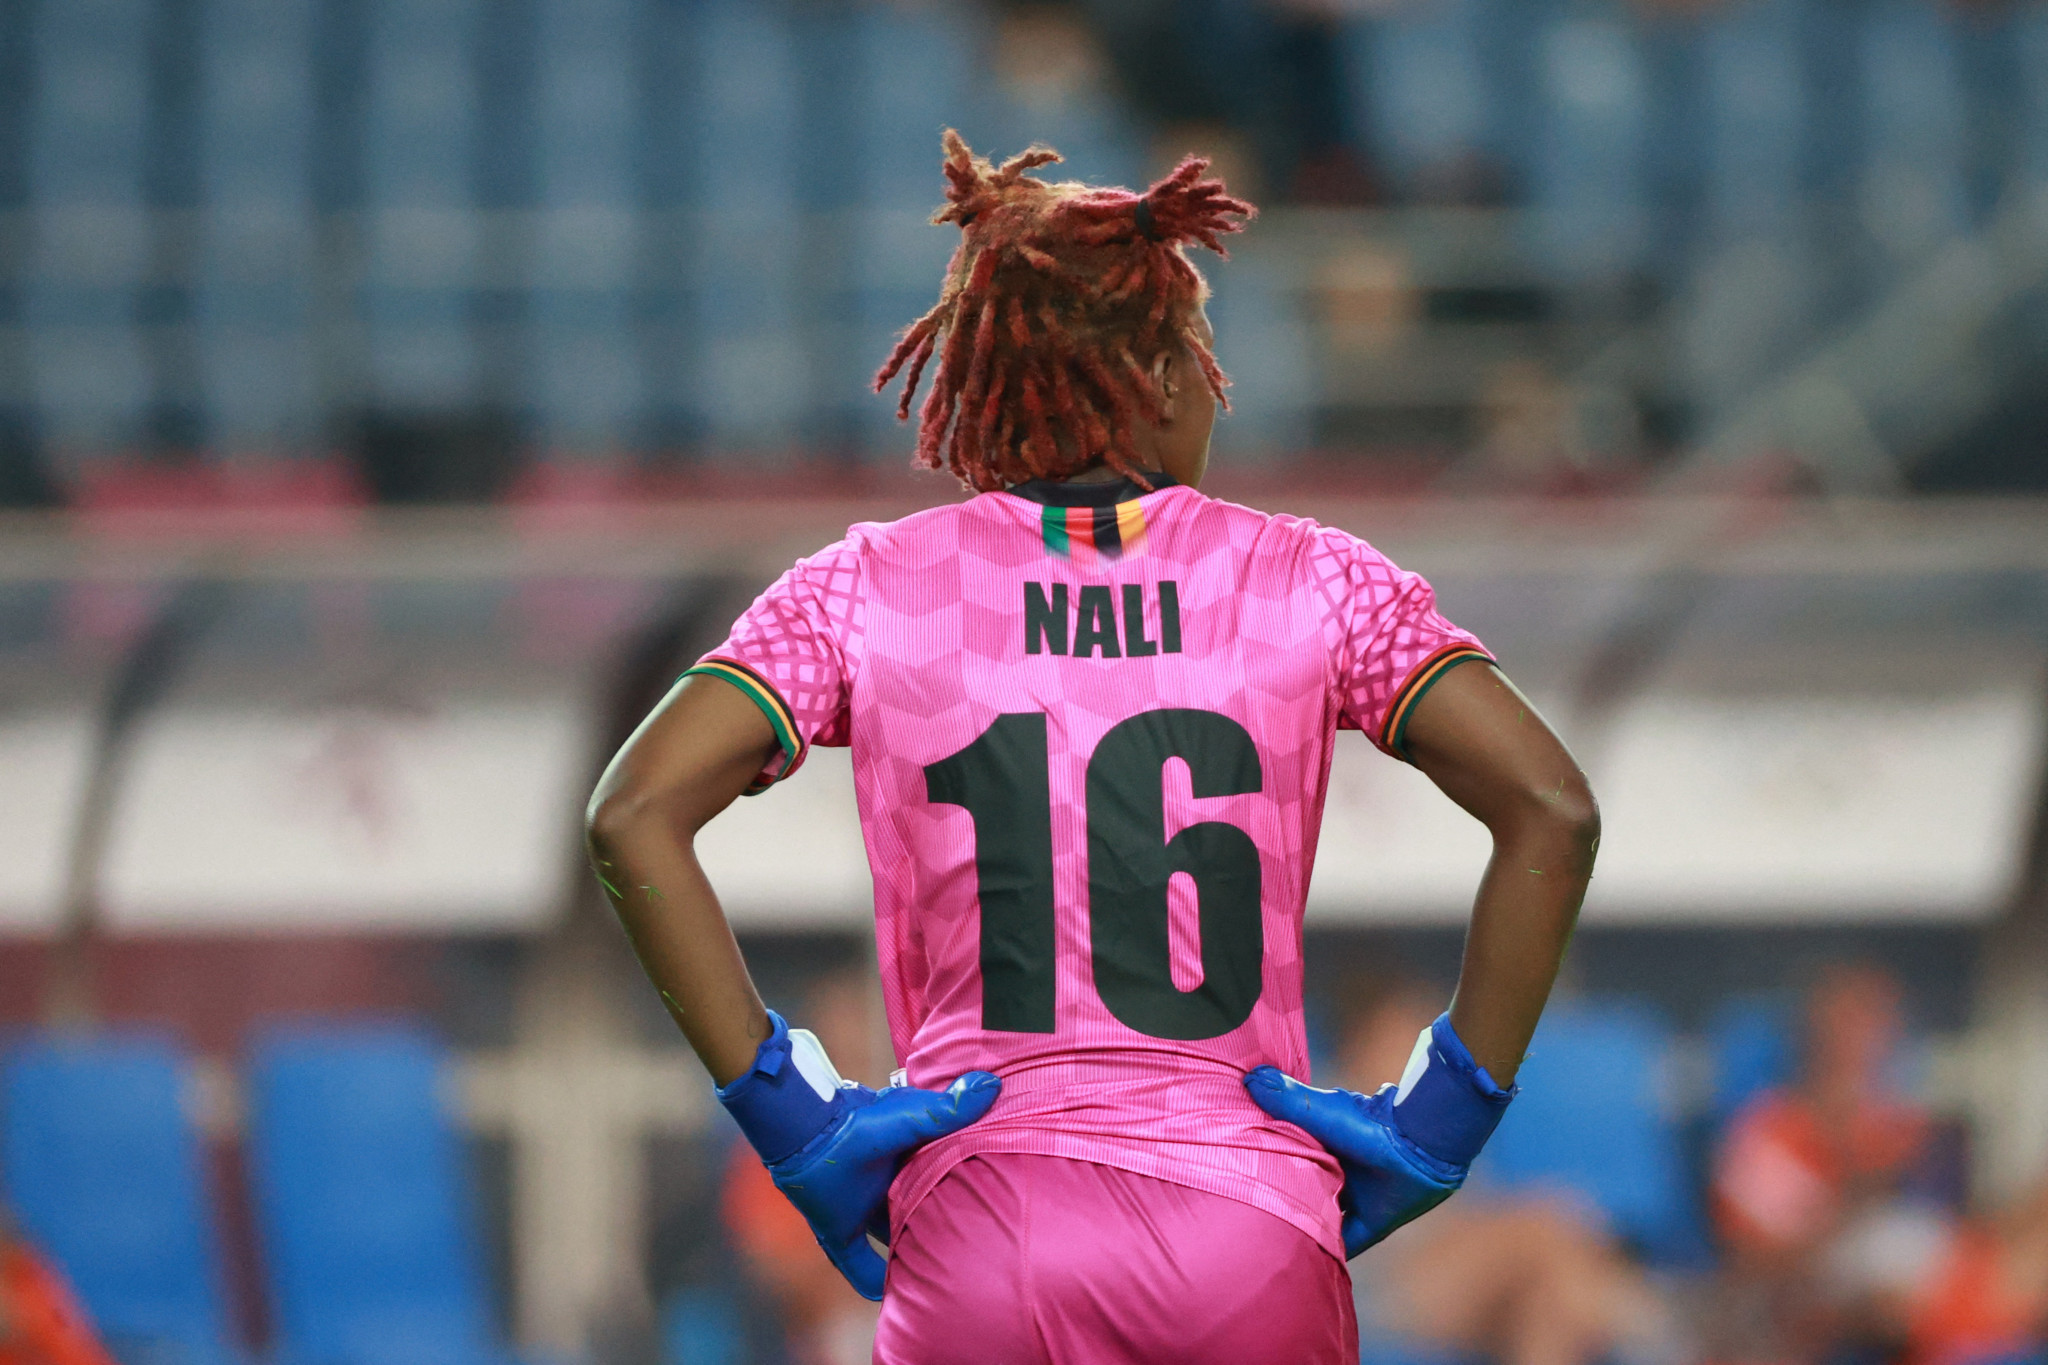 Zambian goalkeeper Hazel Nali scored a penalty as her side reached the last four of the Women's Africa Cup of Nations ©Getty Images